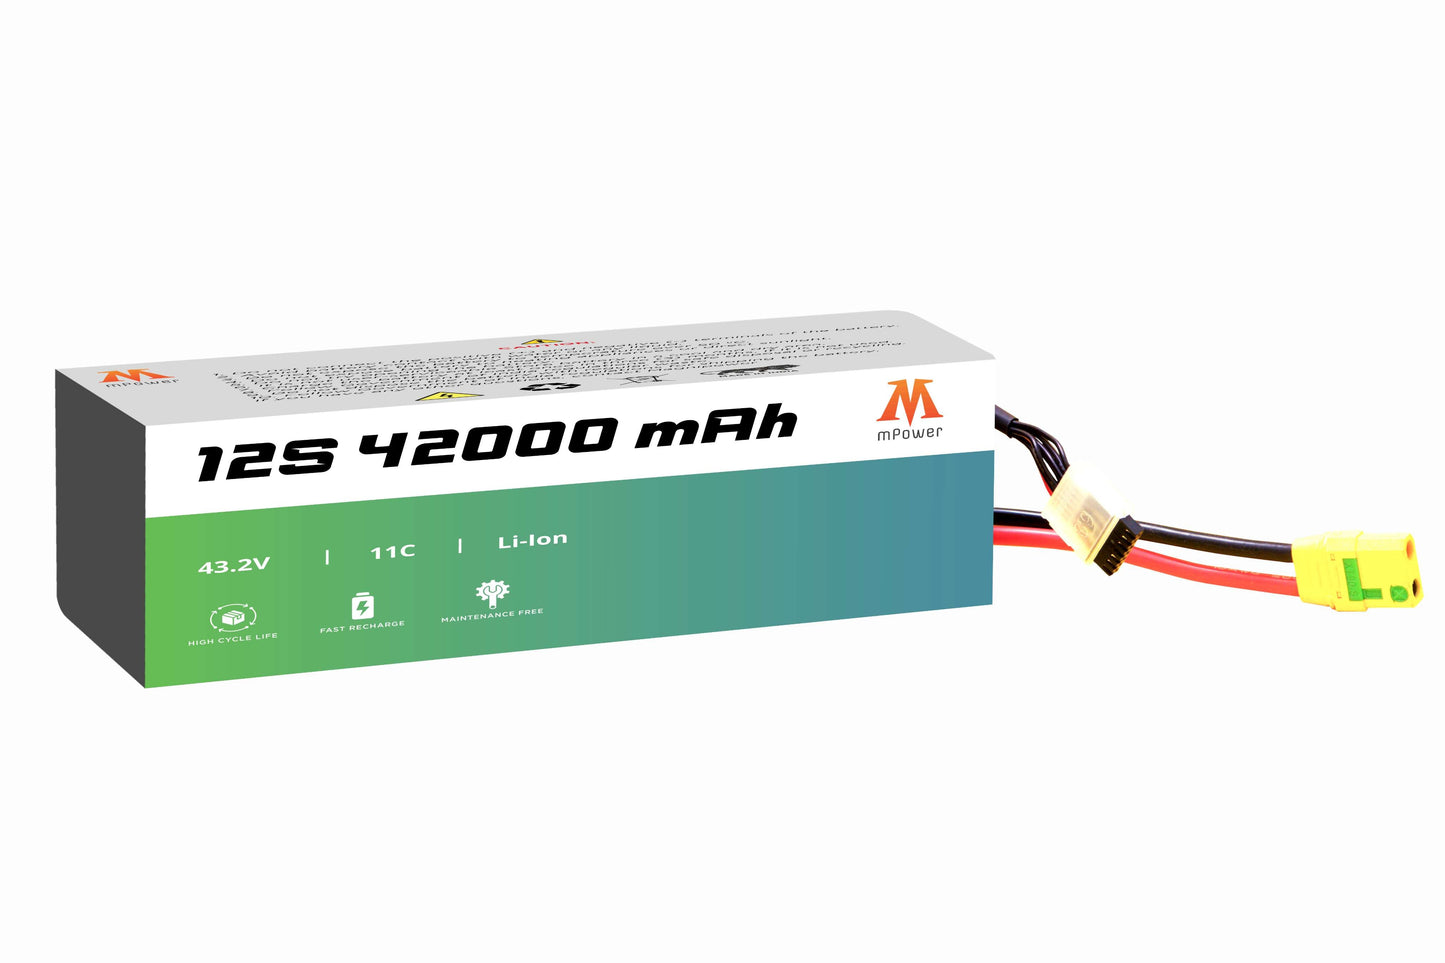 mPower 12S 42000mAh Lithium-Ion Battery for Delivery Drones